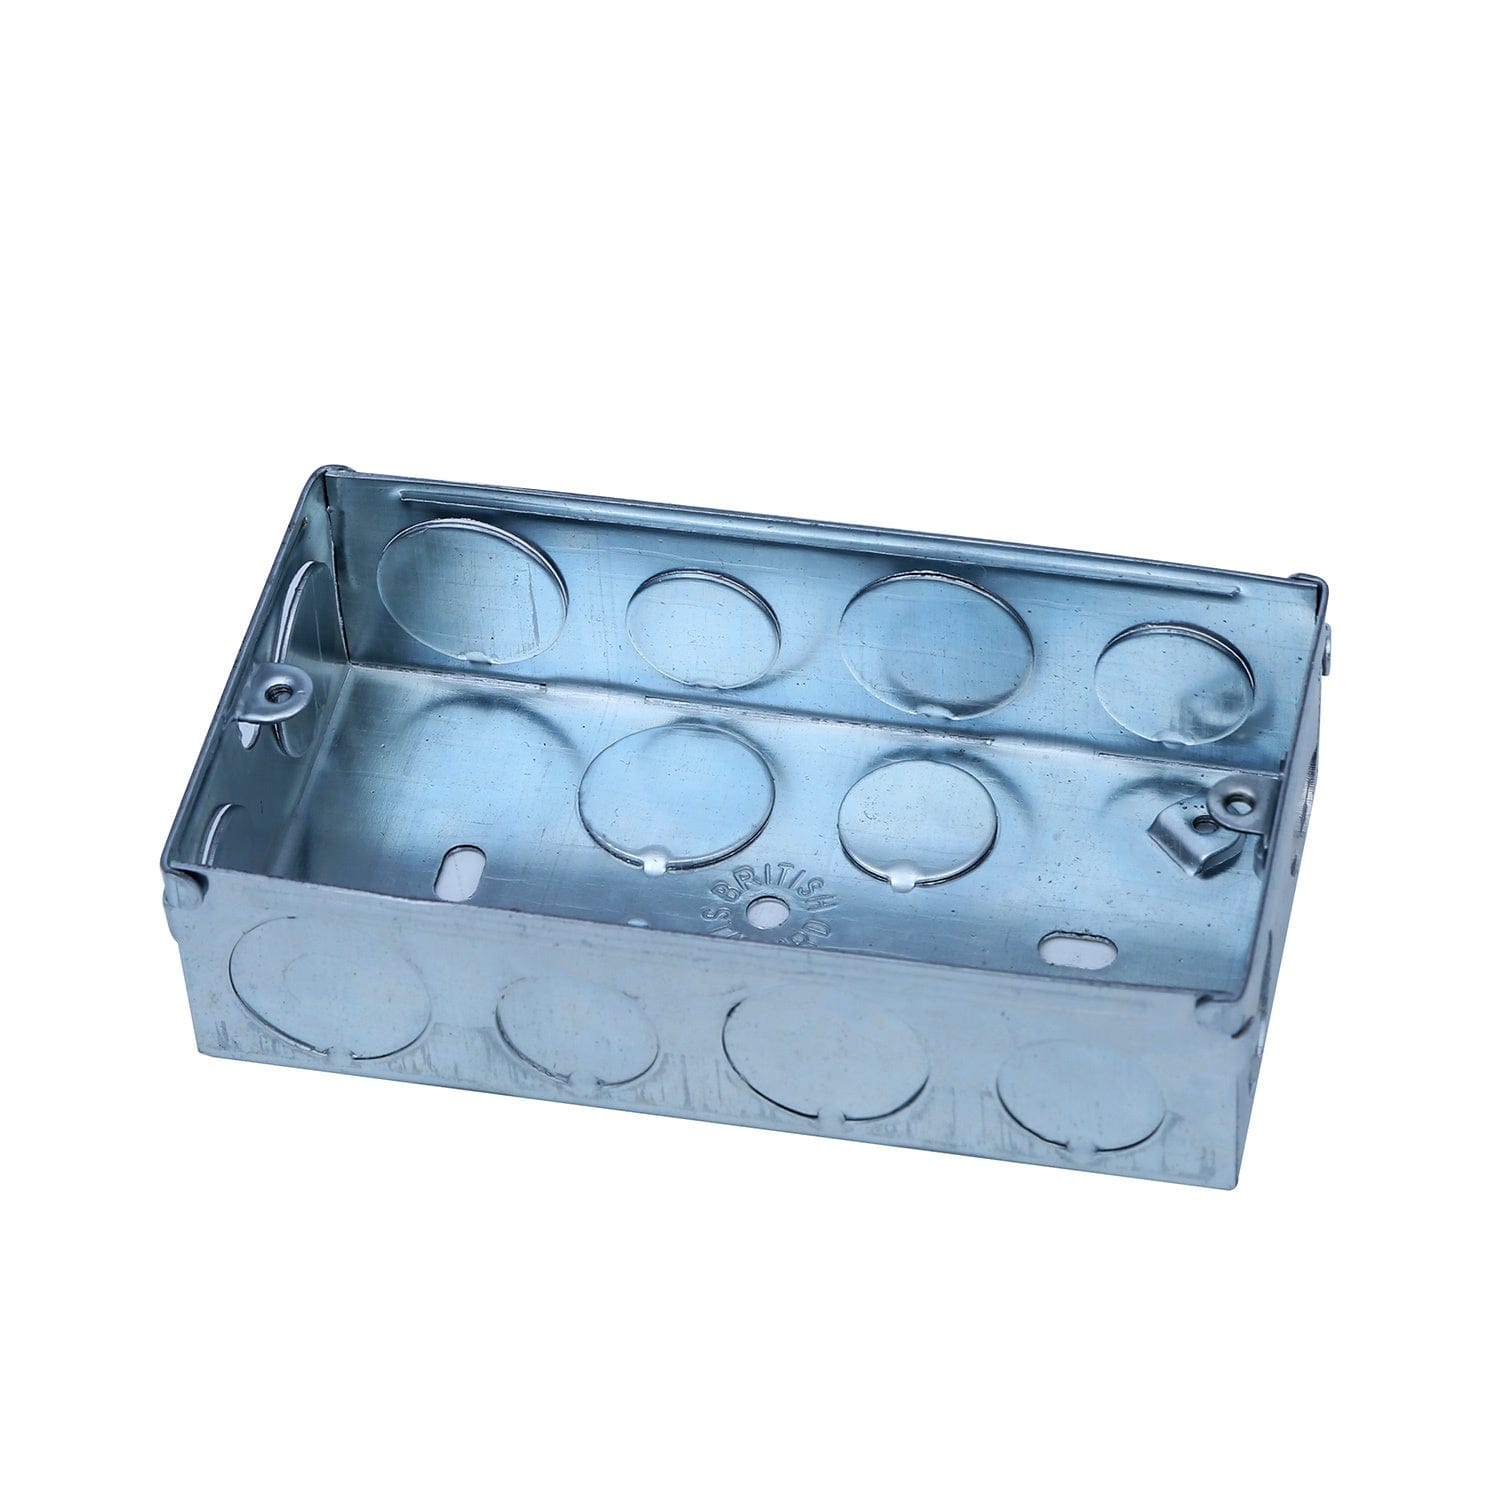 Rexton Galvanized Steel 3 x 6 Electric Conduit Box | Supply Master | Accra, Ghana Switches & Sockets Buy Tools hardware Building materials